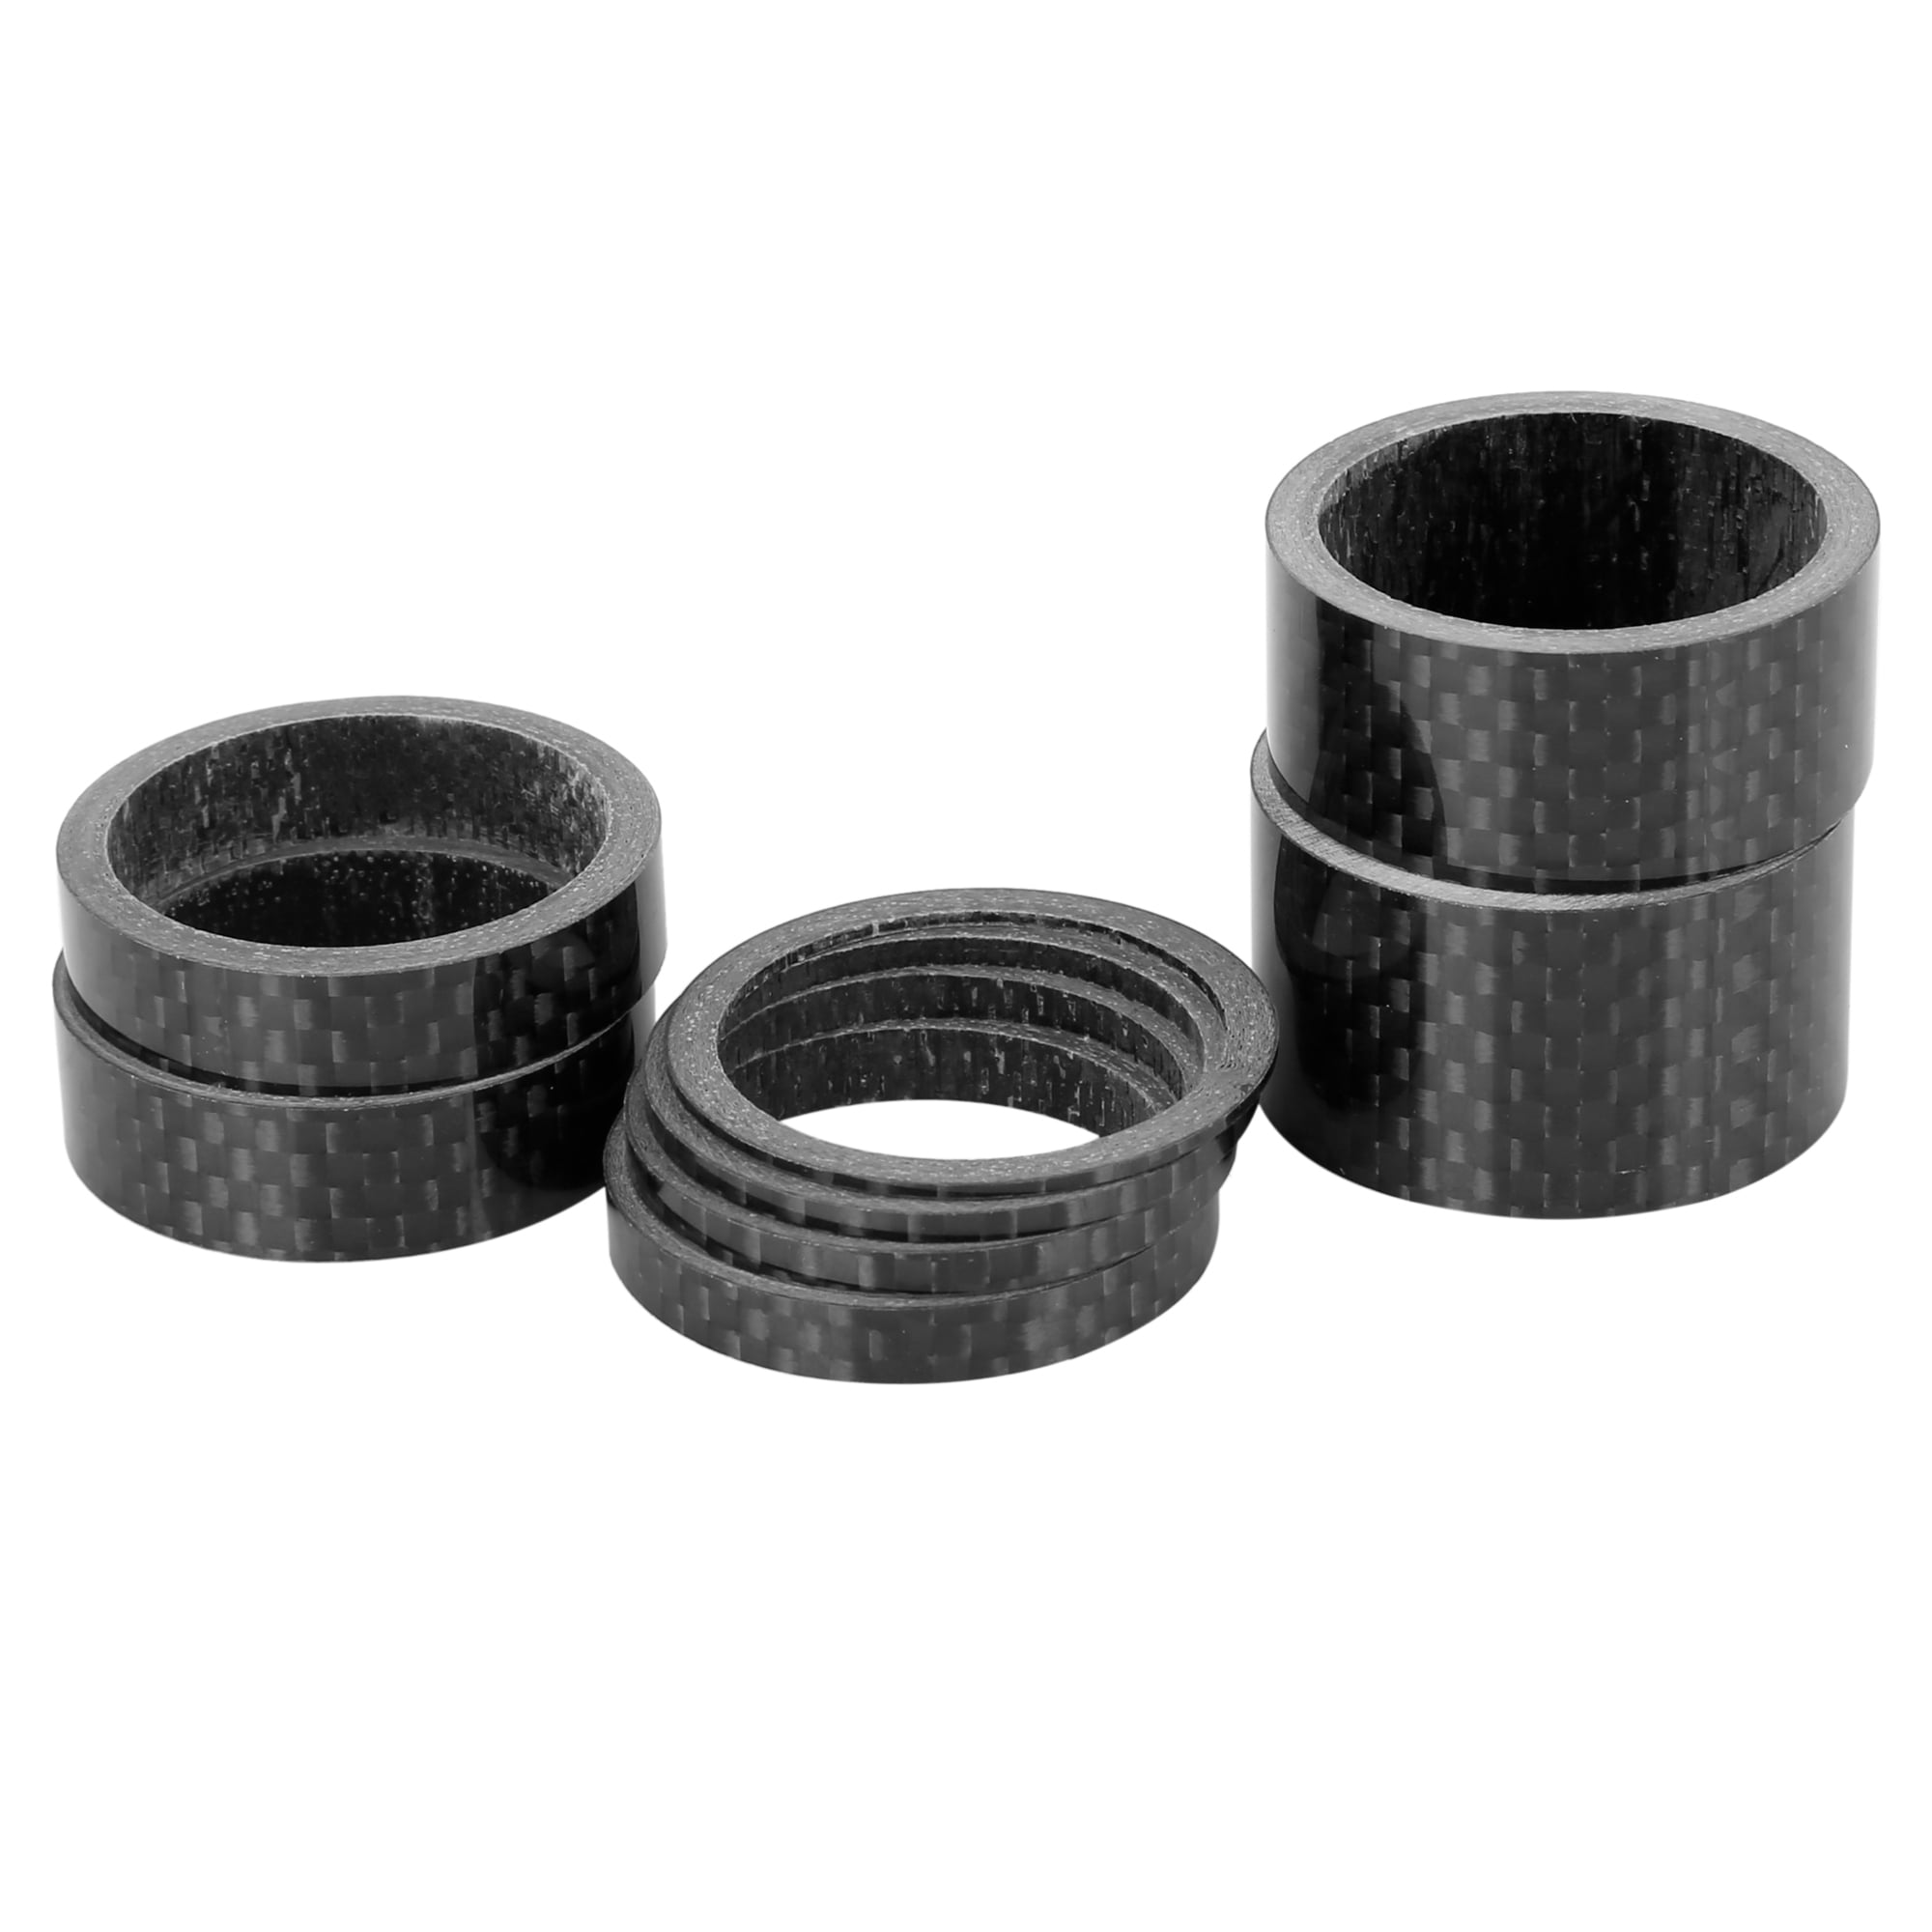 8mm 10mm 15mm 20mm 25mm 1-1/8" Tapered Carbon Headset Stem Cycling Bike Spacer 